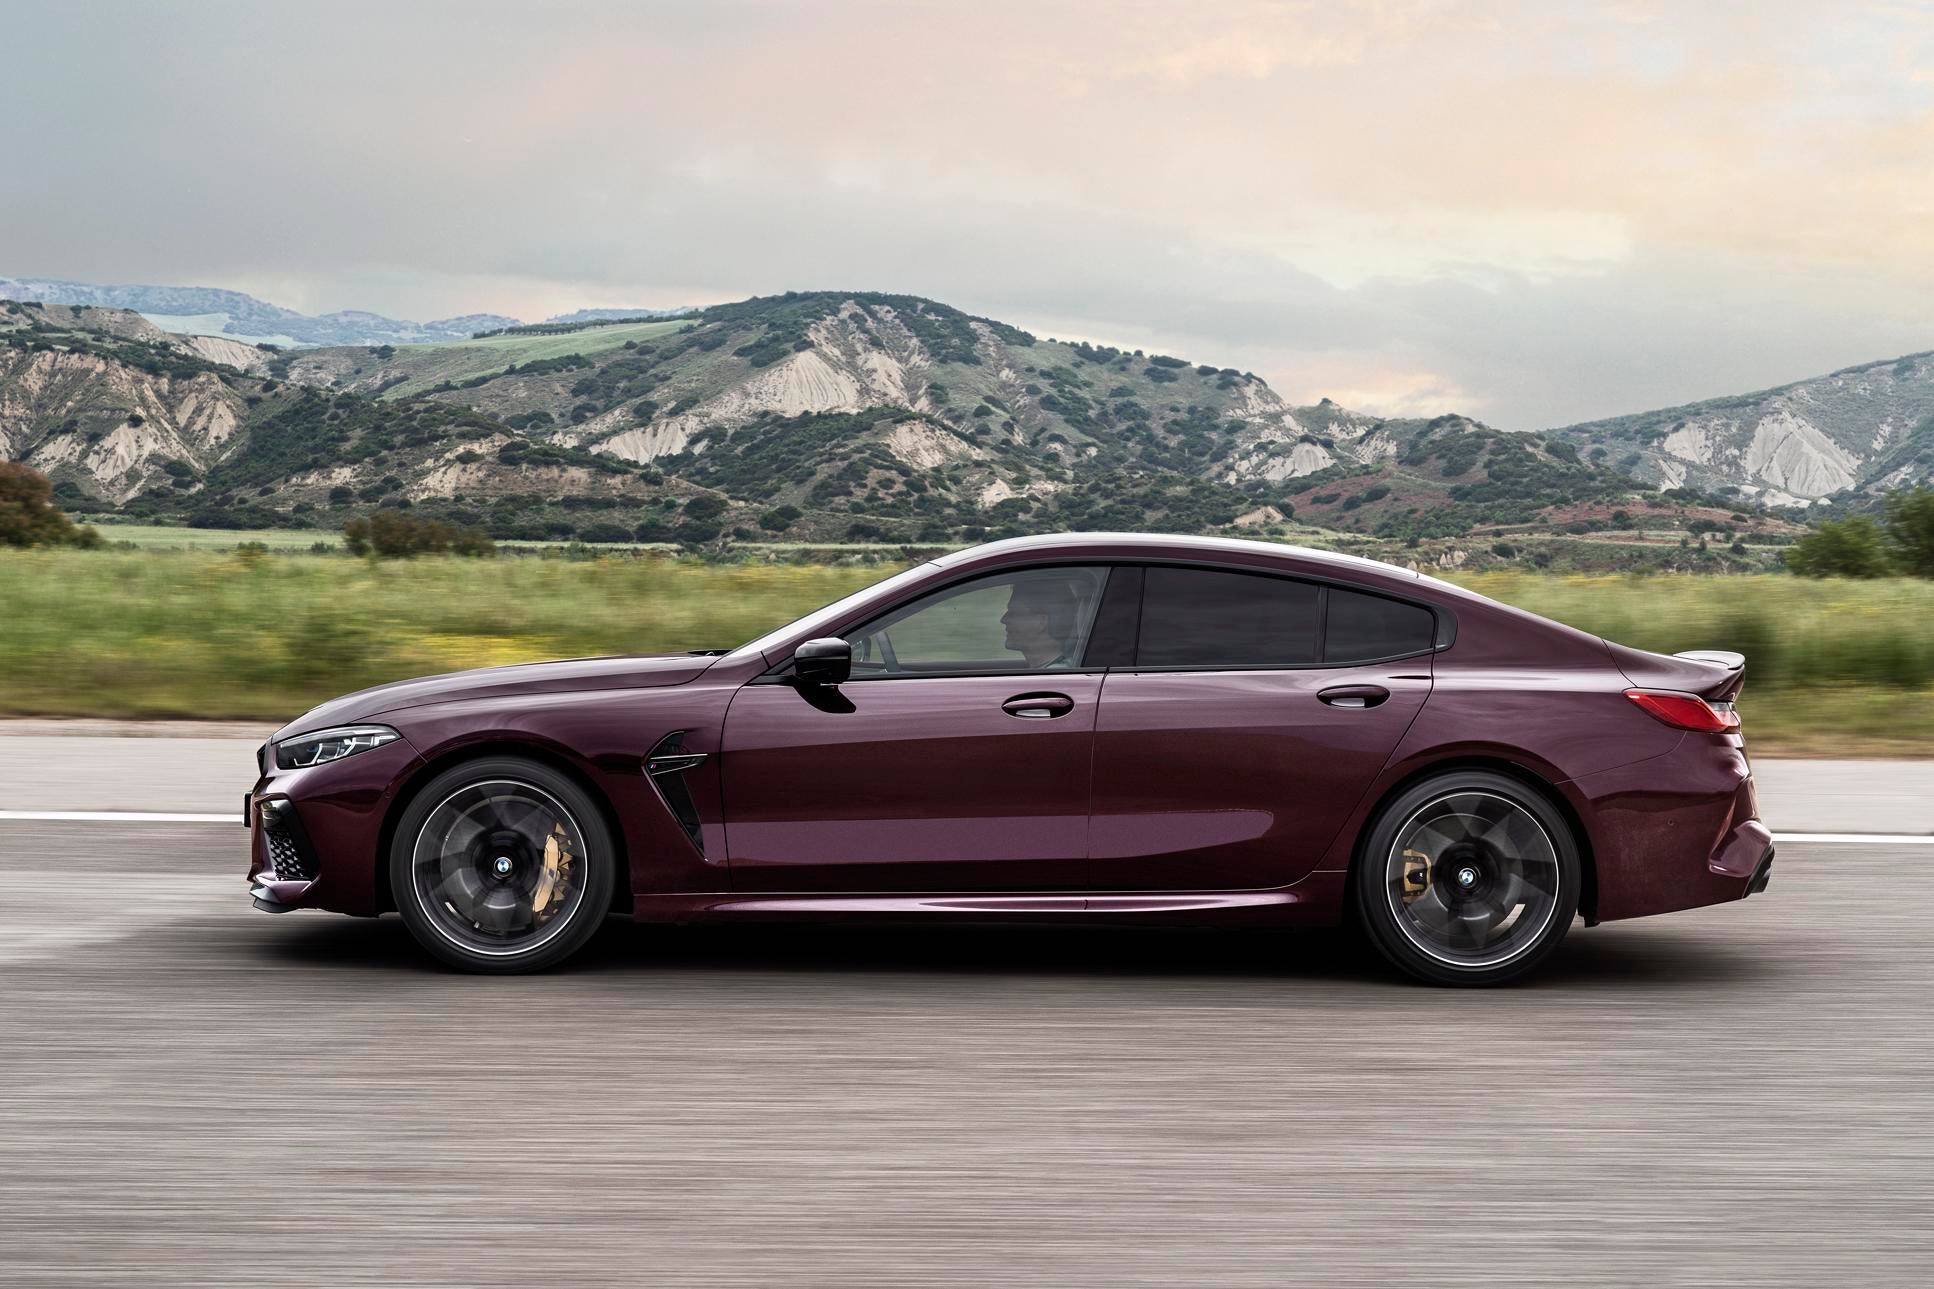 The 2020 BMW M8 Gran Coupe Is a Sublime Tourer With 600 HP